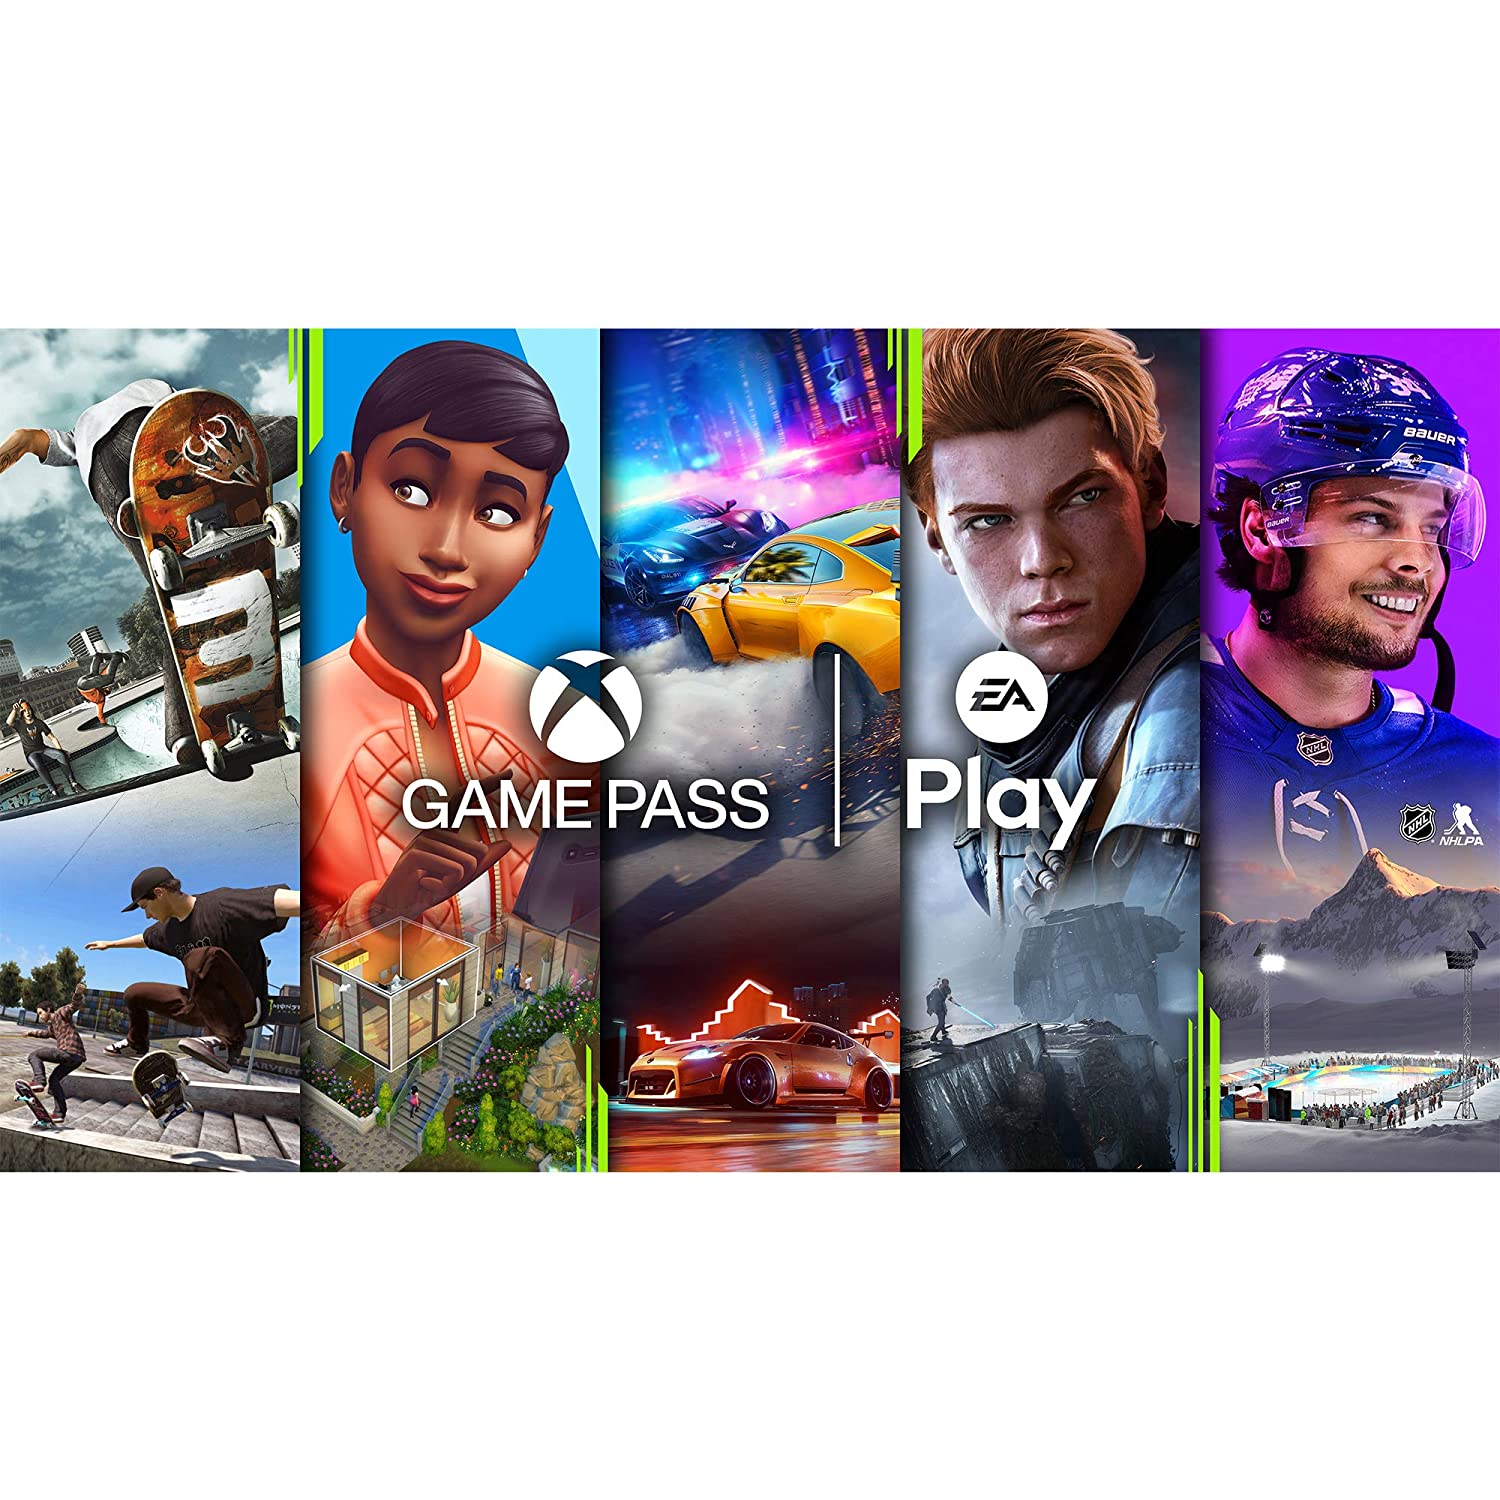 xbox game pass ultimate 12 month deal